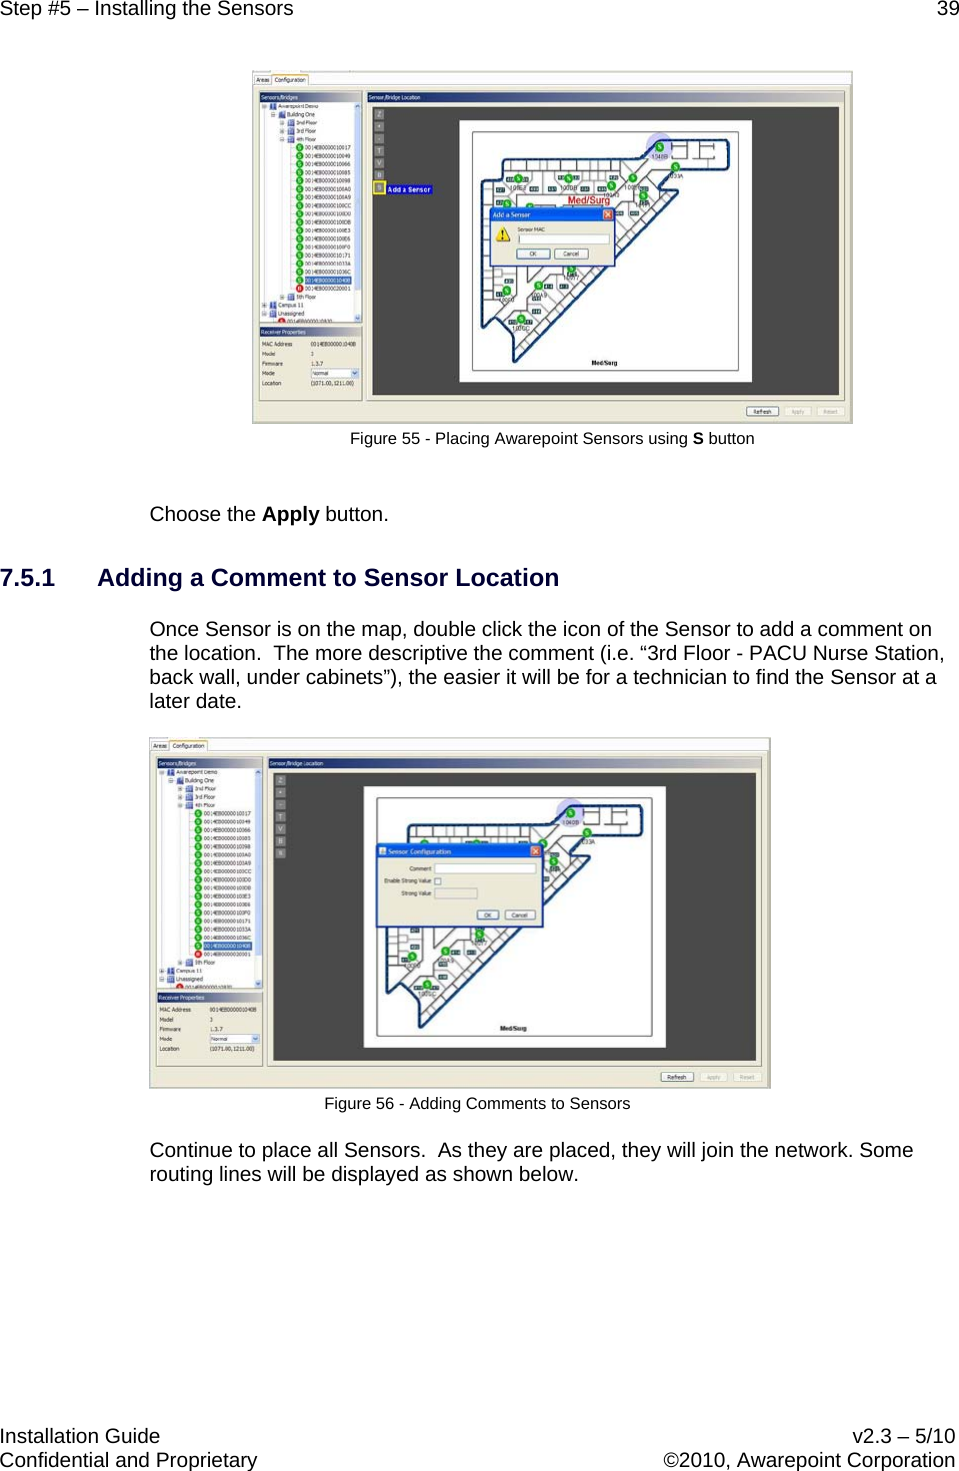 Step #5 – Installing the Sensors    39   Installation Guide    v2.3 – 5/10 Confidential and Proprietary    ©2010, Awarepoint Corporation   Figure 55 - Placing Awarepoint Sensors using S button  Choose the Apply button. 7.5.1 Adding a Comment to Sensor Location Once Sensor is on the map, double click the icon of the Sensor to add a comment on the location.  The more descriptive the comment (i.e. “3rd Floor - PACU Nurse Station, back wall, under cabinets”), the easier it will be for a technician to find the Sensor at a later date.  Figure 56 - Adding Comments to Sensors Continue to place all Sensors.  As they are placed, they will join the network. Some routing lines will be displayed as shown below. 